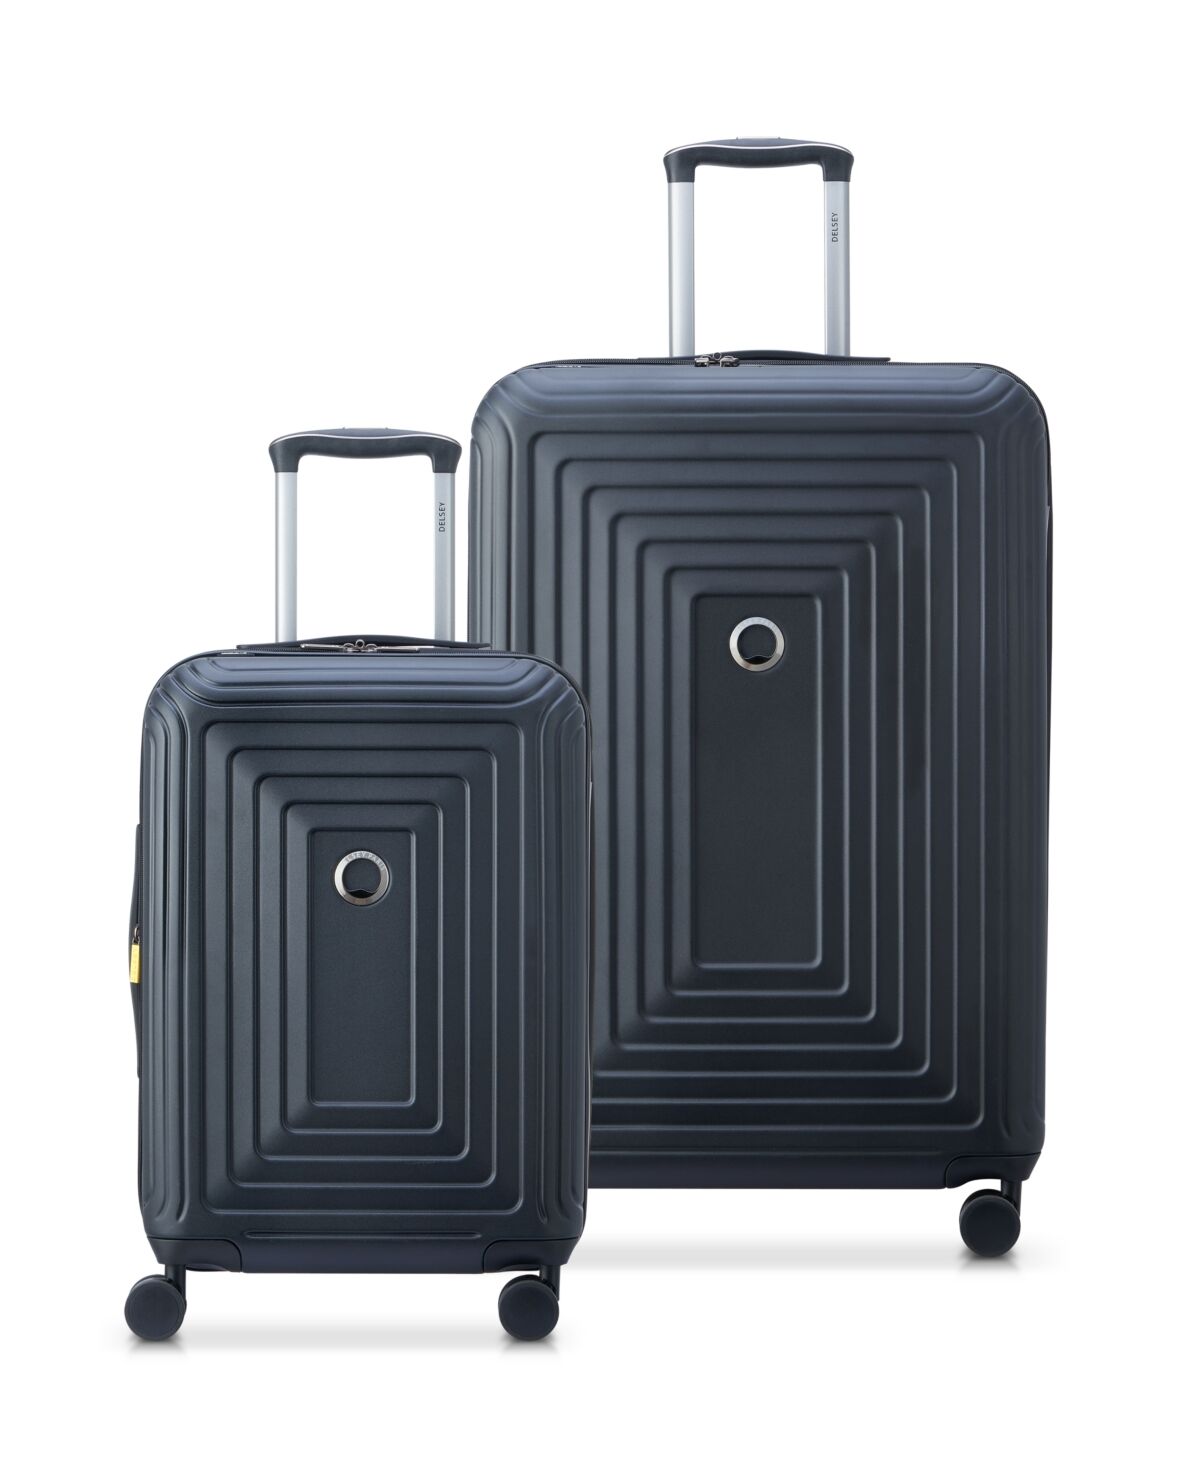 Delsey Corsica 2 Piece Hardside Luggage Set, Carry-On and 27